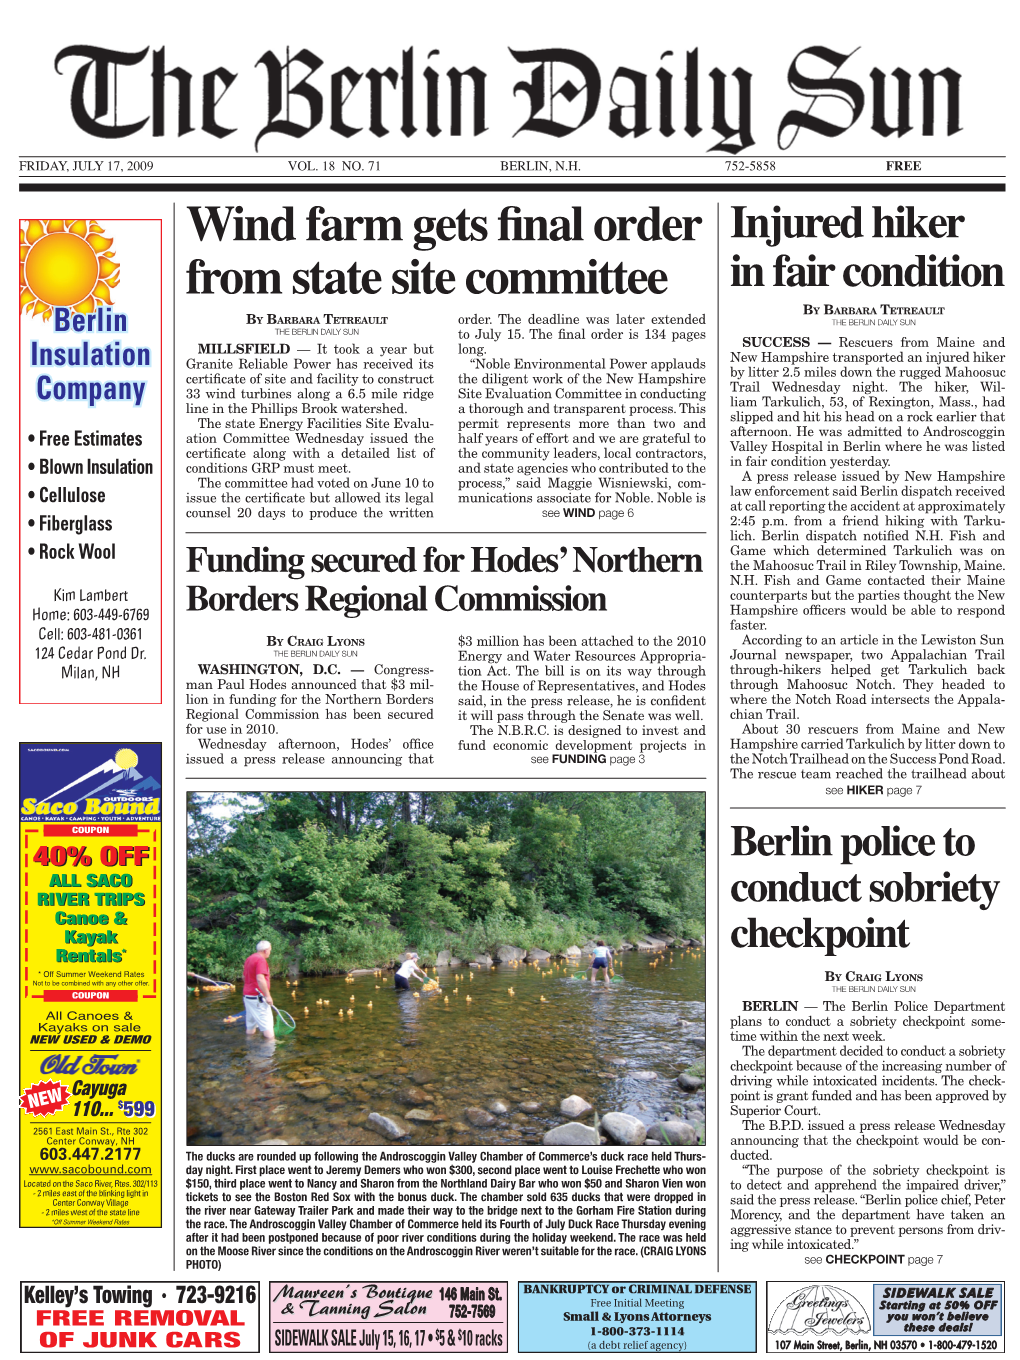 Wind Farm Gets Final Order from State Site Committee